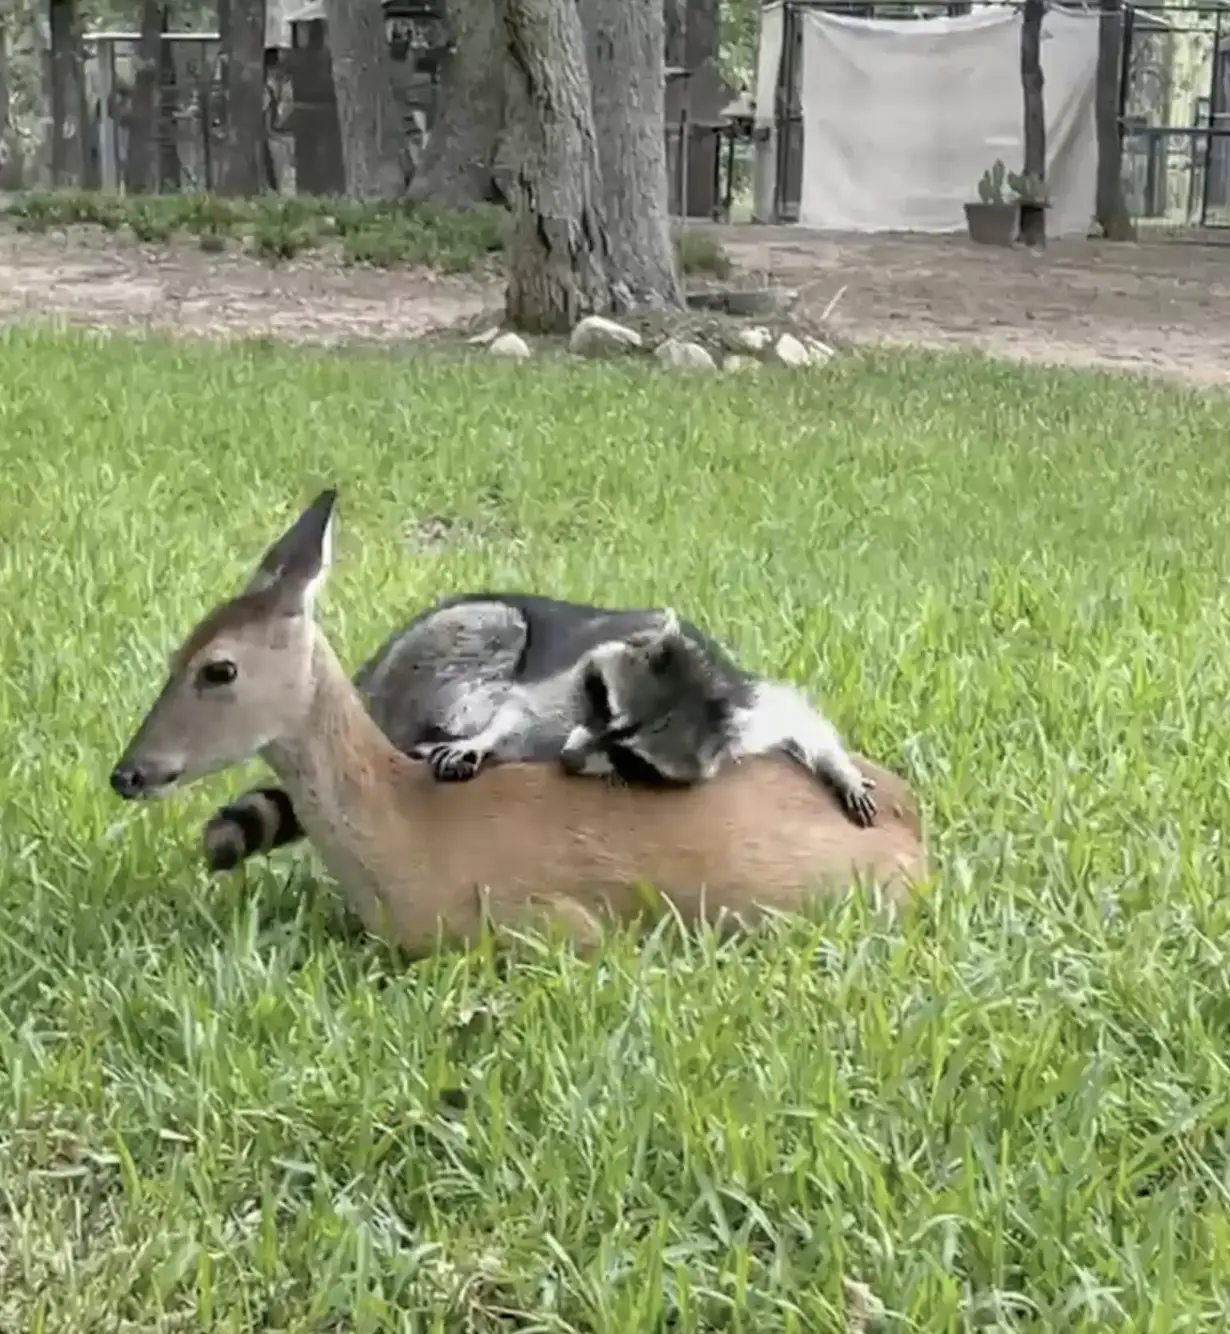 A single fawn deeply touched him.